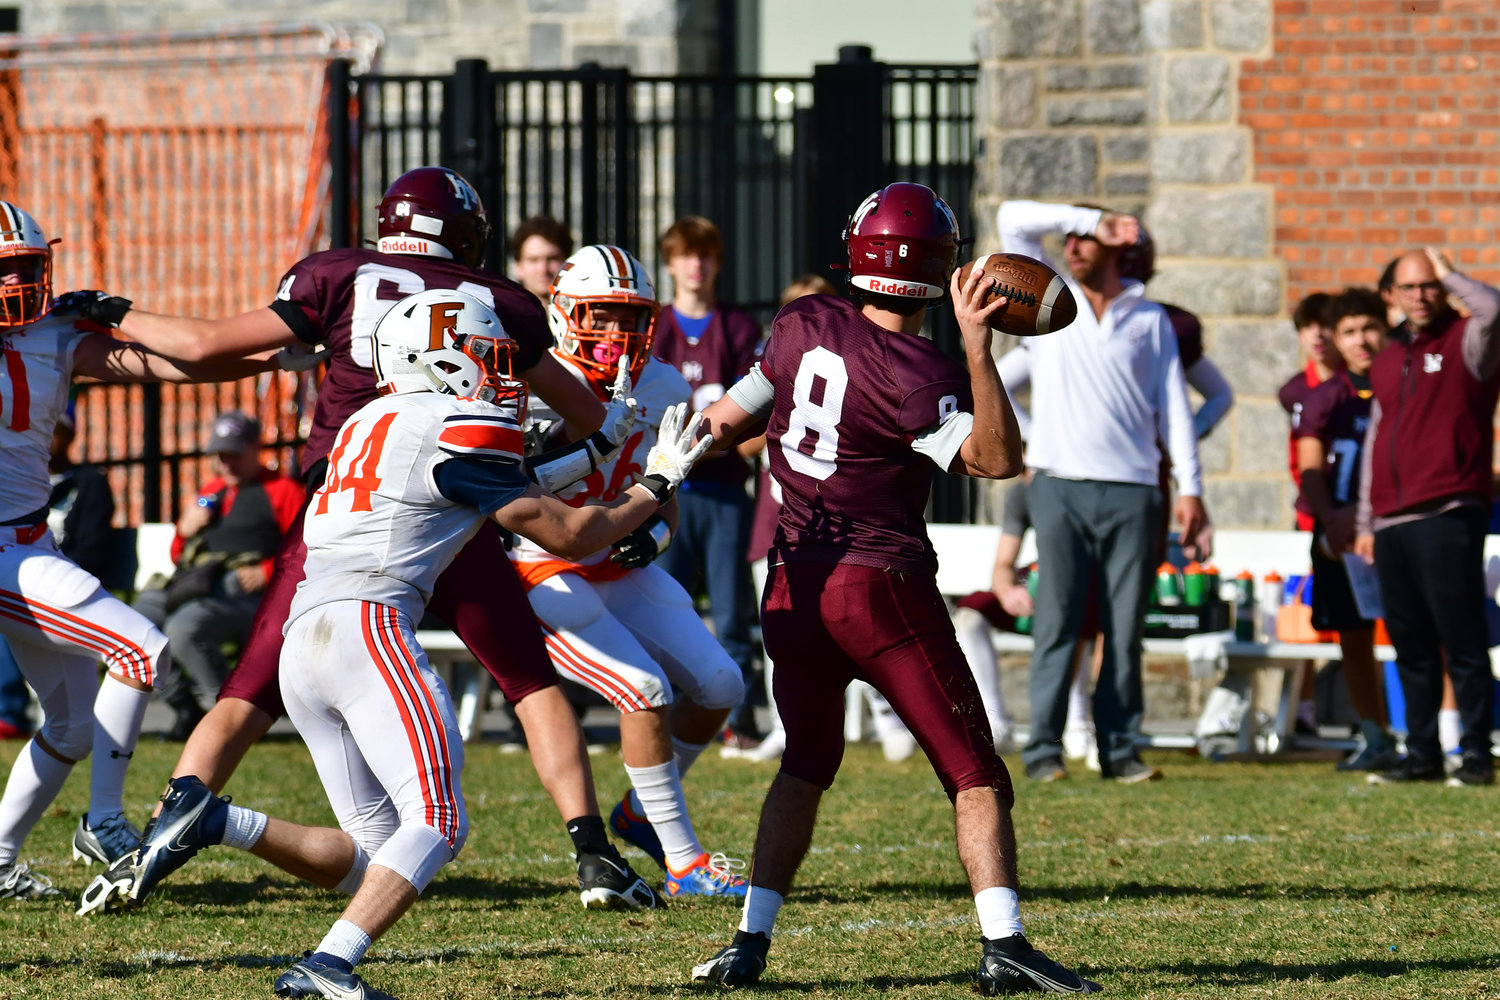 The Horace Mann School quarterback prepares to fire a pass downfield against Fieldston Saturday during the Lions’ 41-15 win.